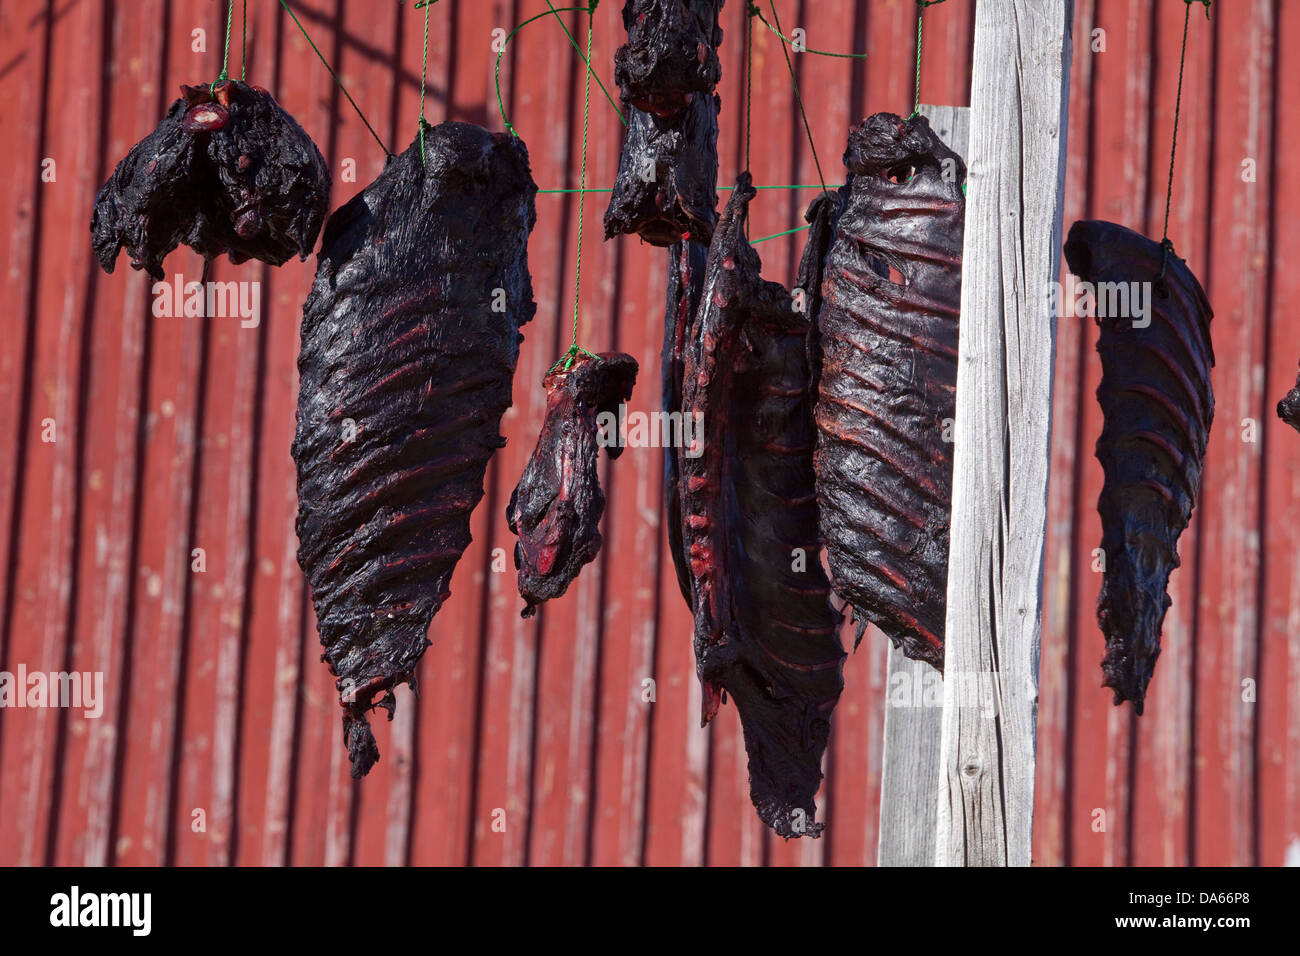 Seal meat, Greenland, East Greenland, food, Food, dry, Stock Photo